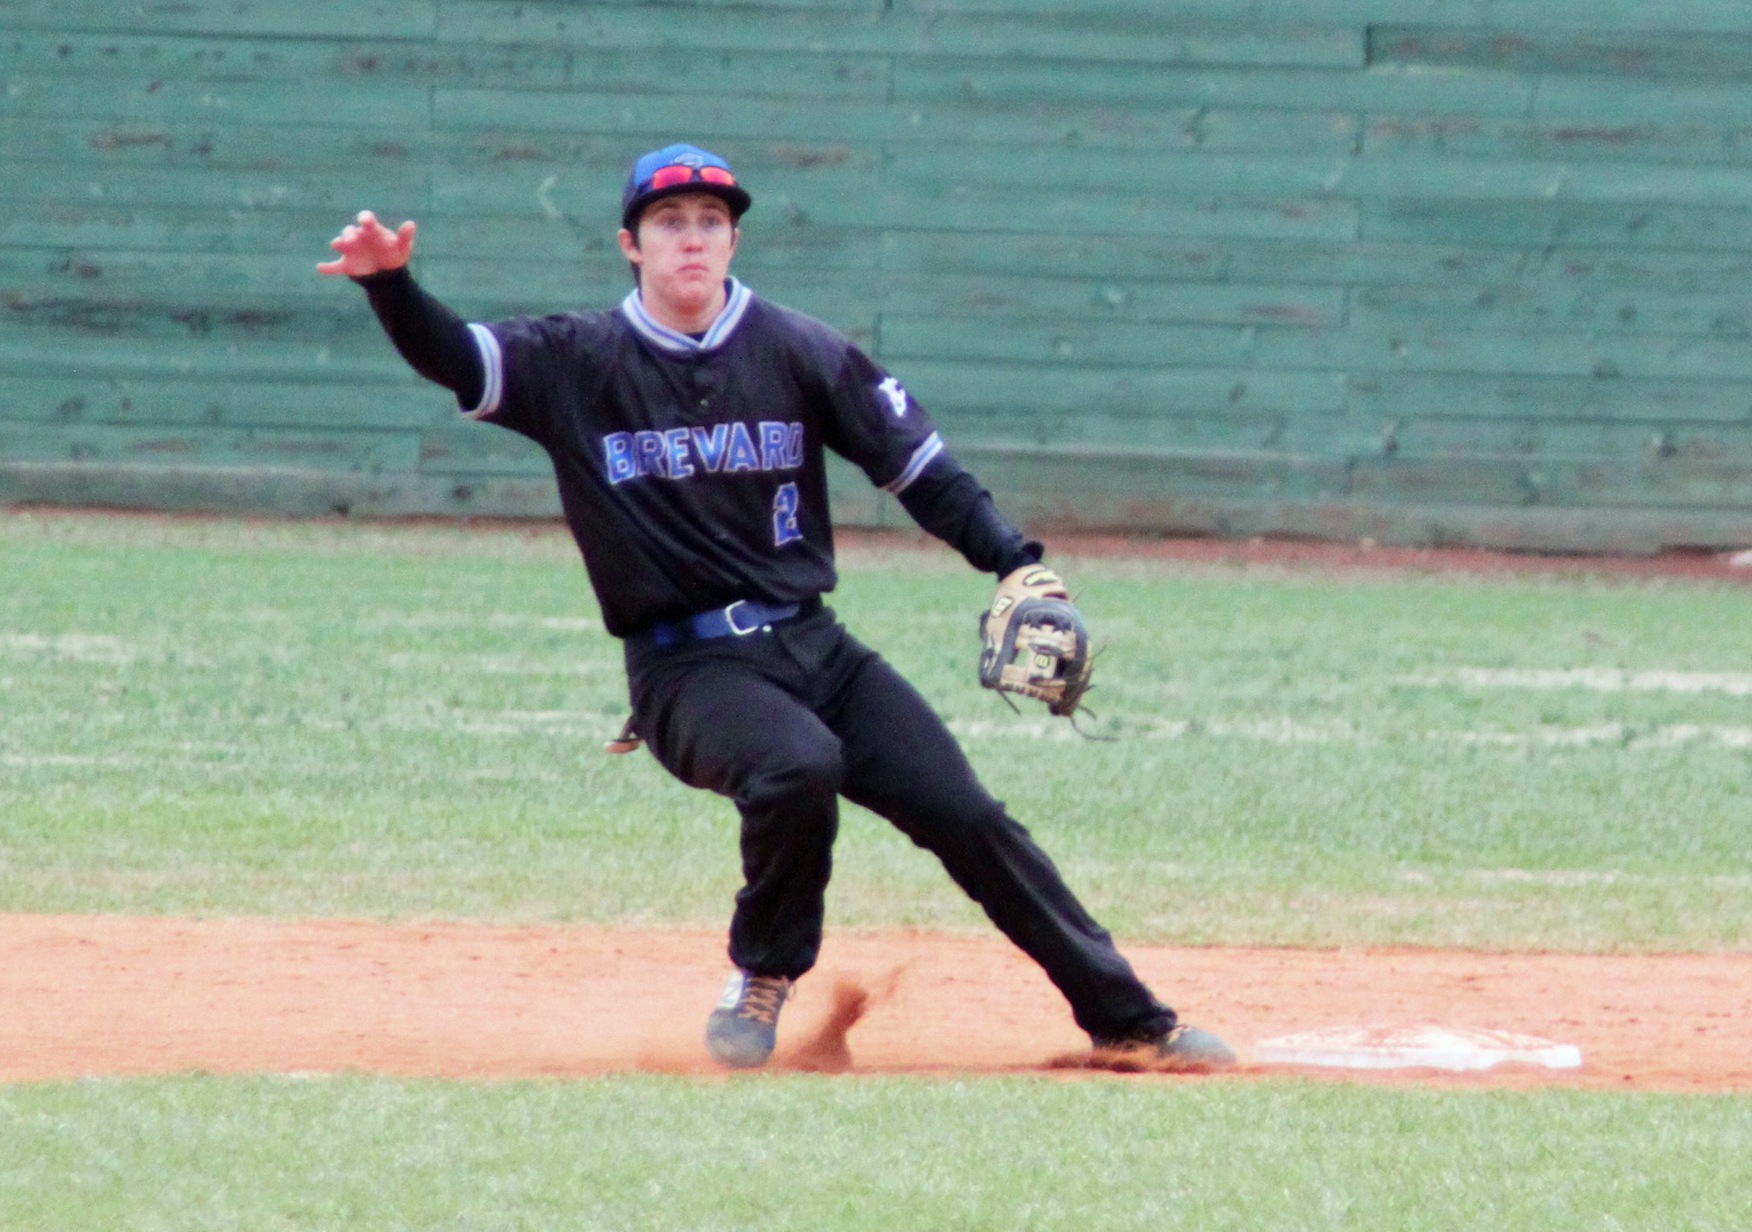 Jason Jucker went 2-for-3 at the plate for Brevard, scoring two runs and drawing a pair of walks (Photo courtesy of Judy Victory)